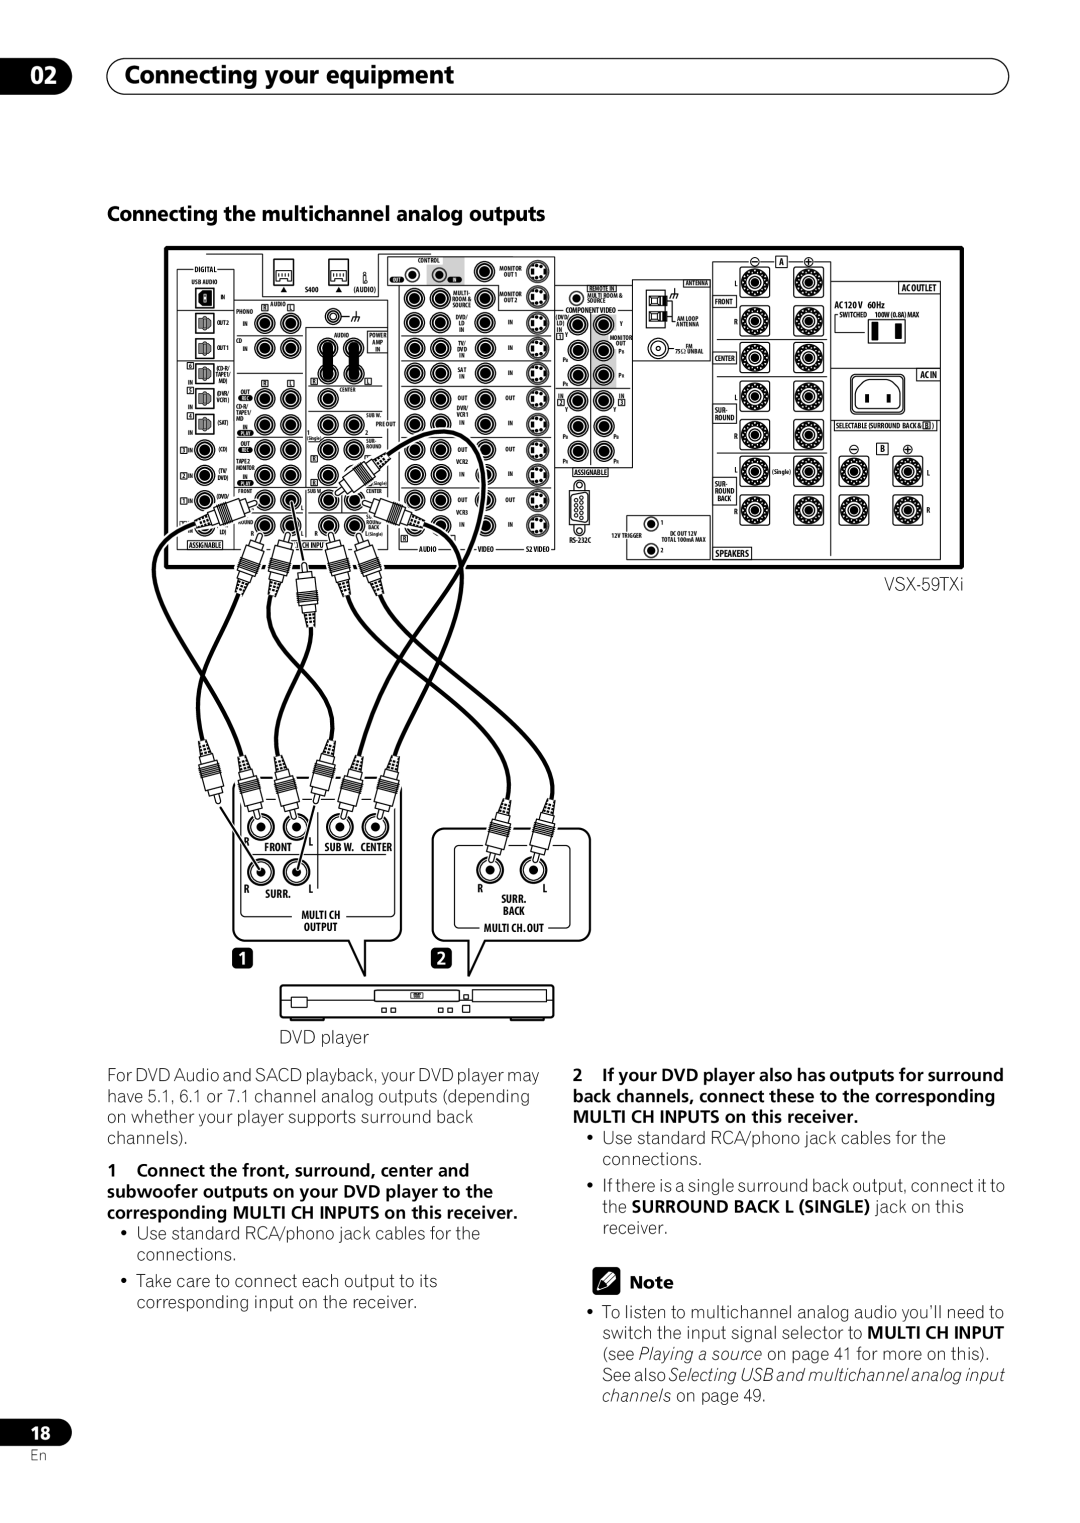 Pioneer VSX-59TXi operating instructions 02Connecting your equipment, Connecting the multichannel analog outputs 